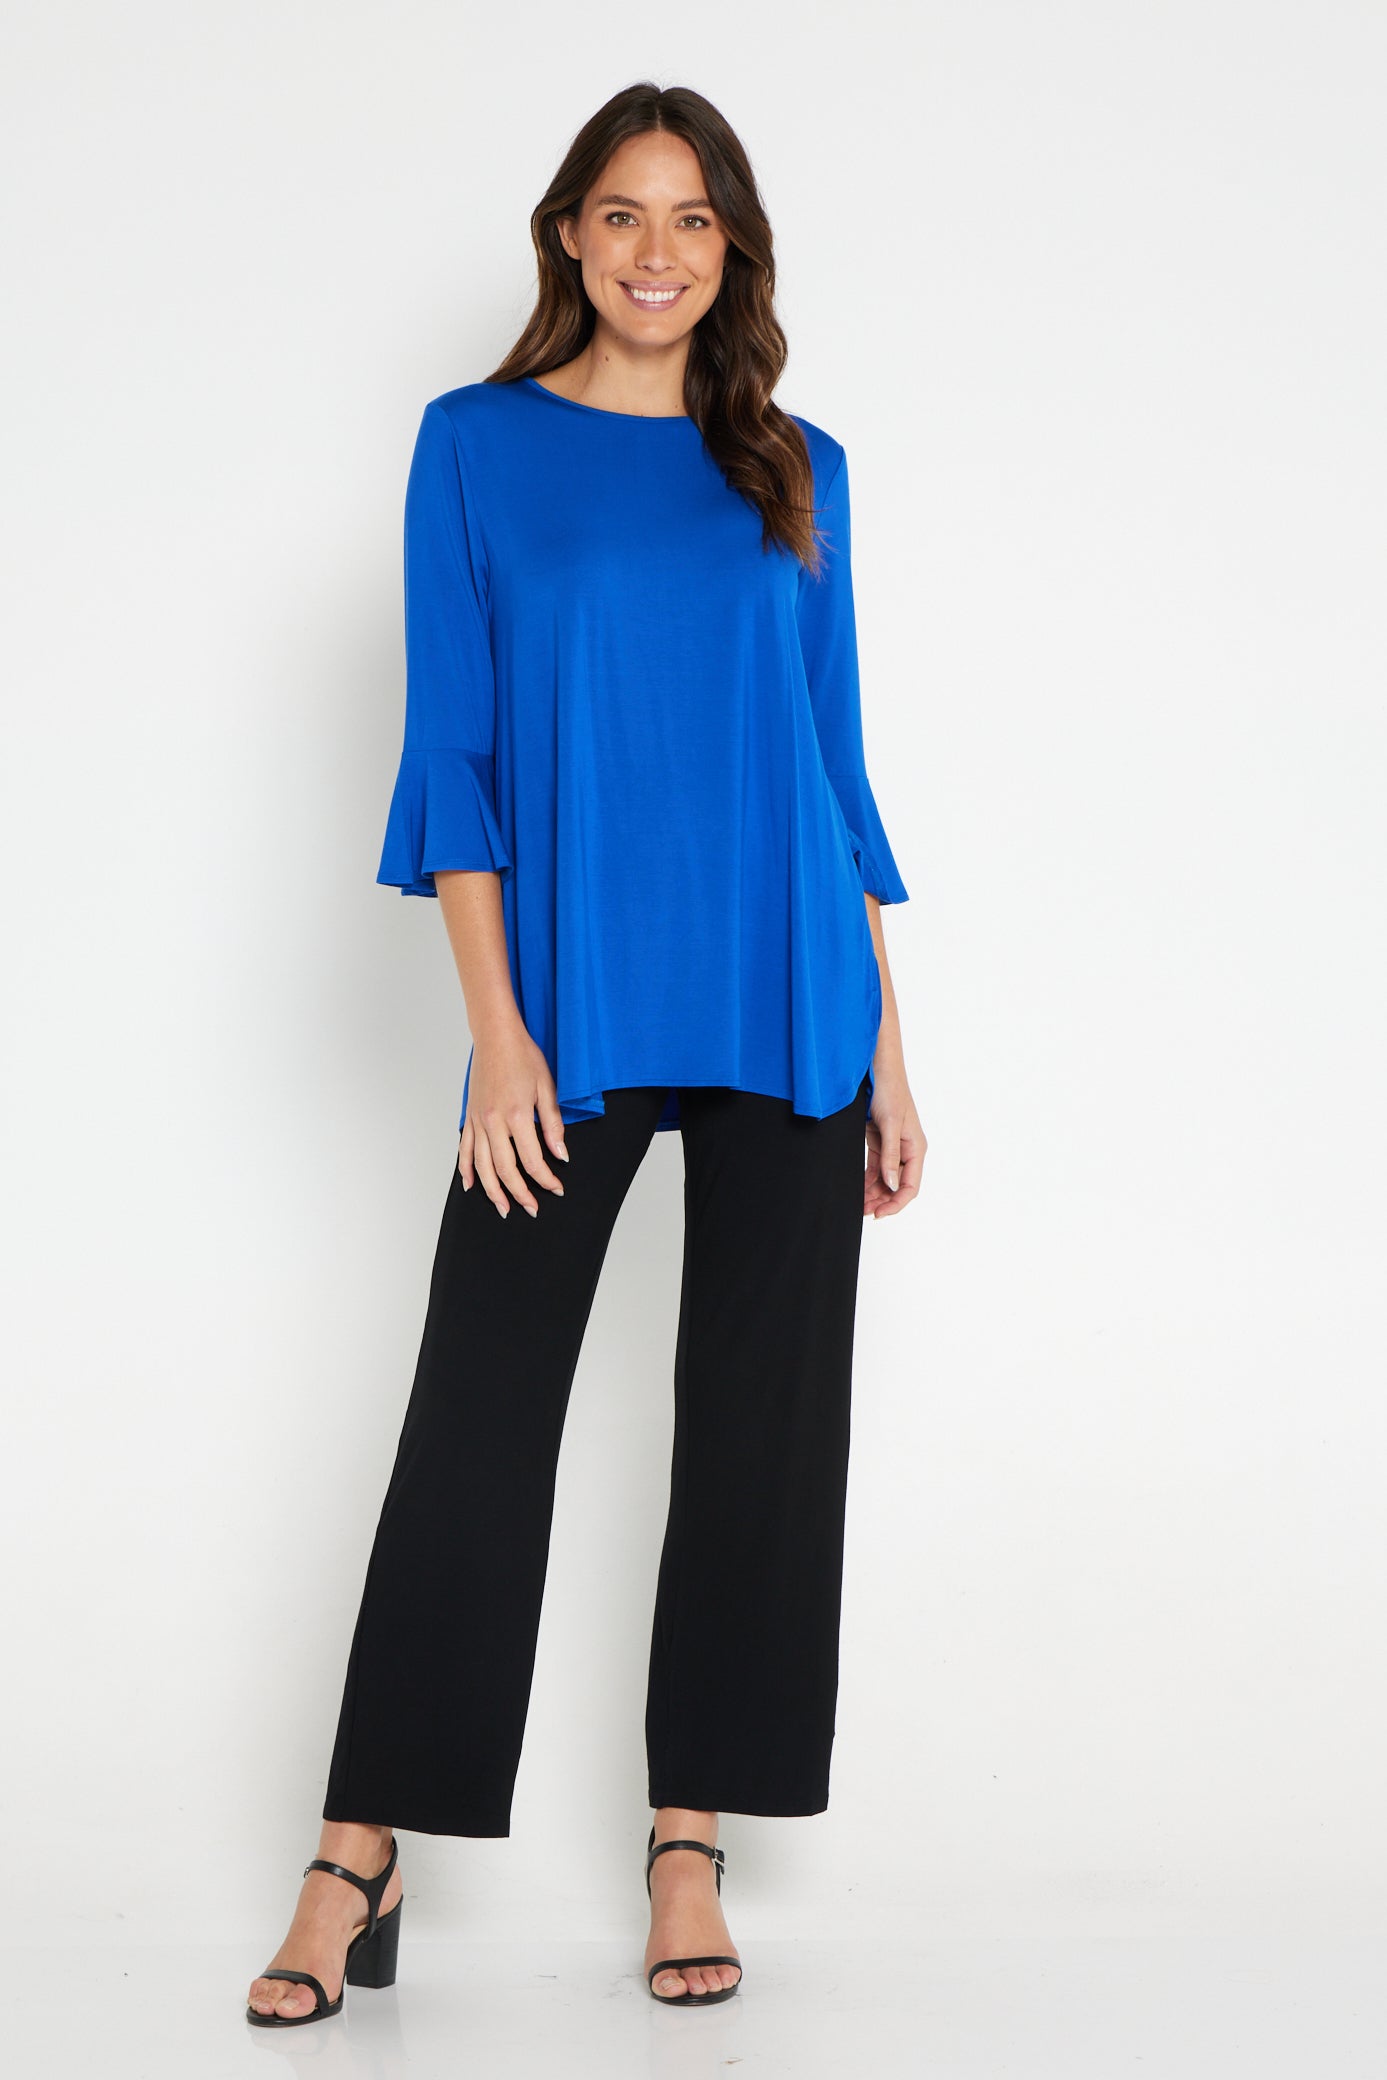 Lacey Bamboo Top - Royal Blue